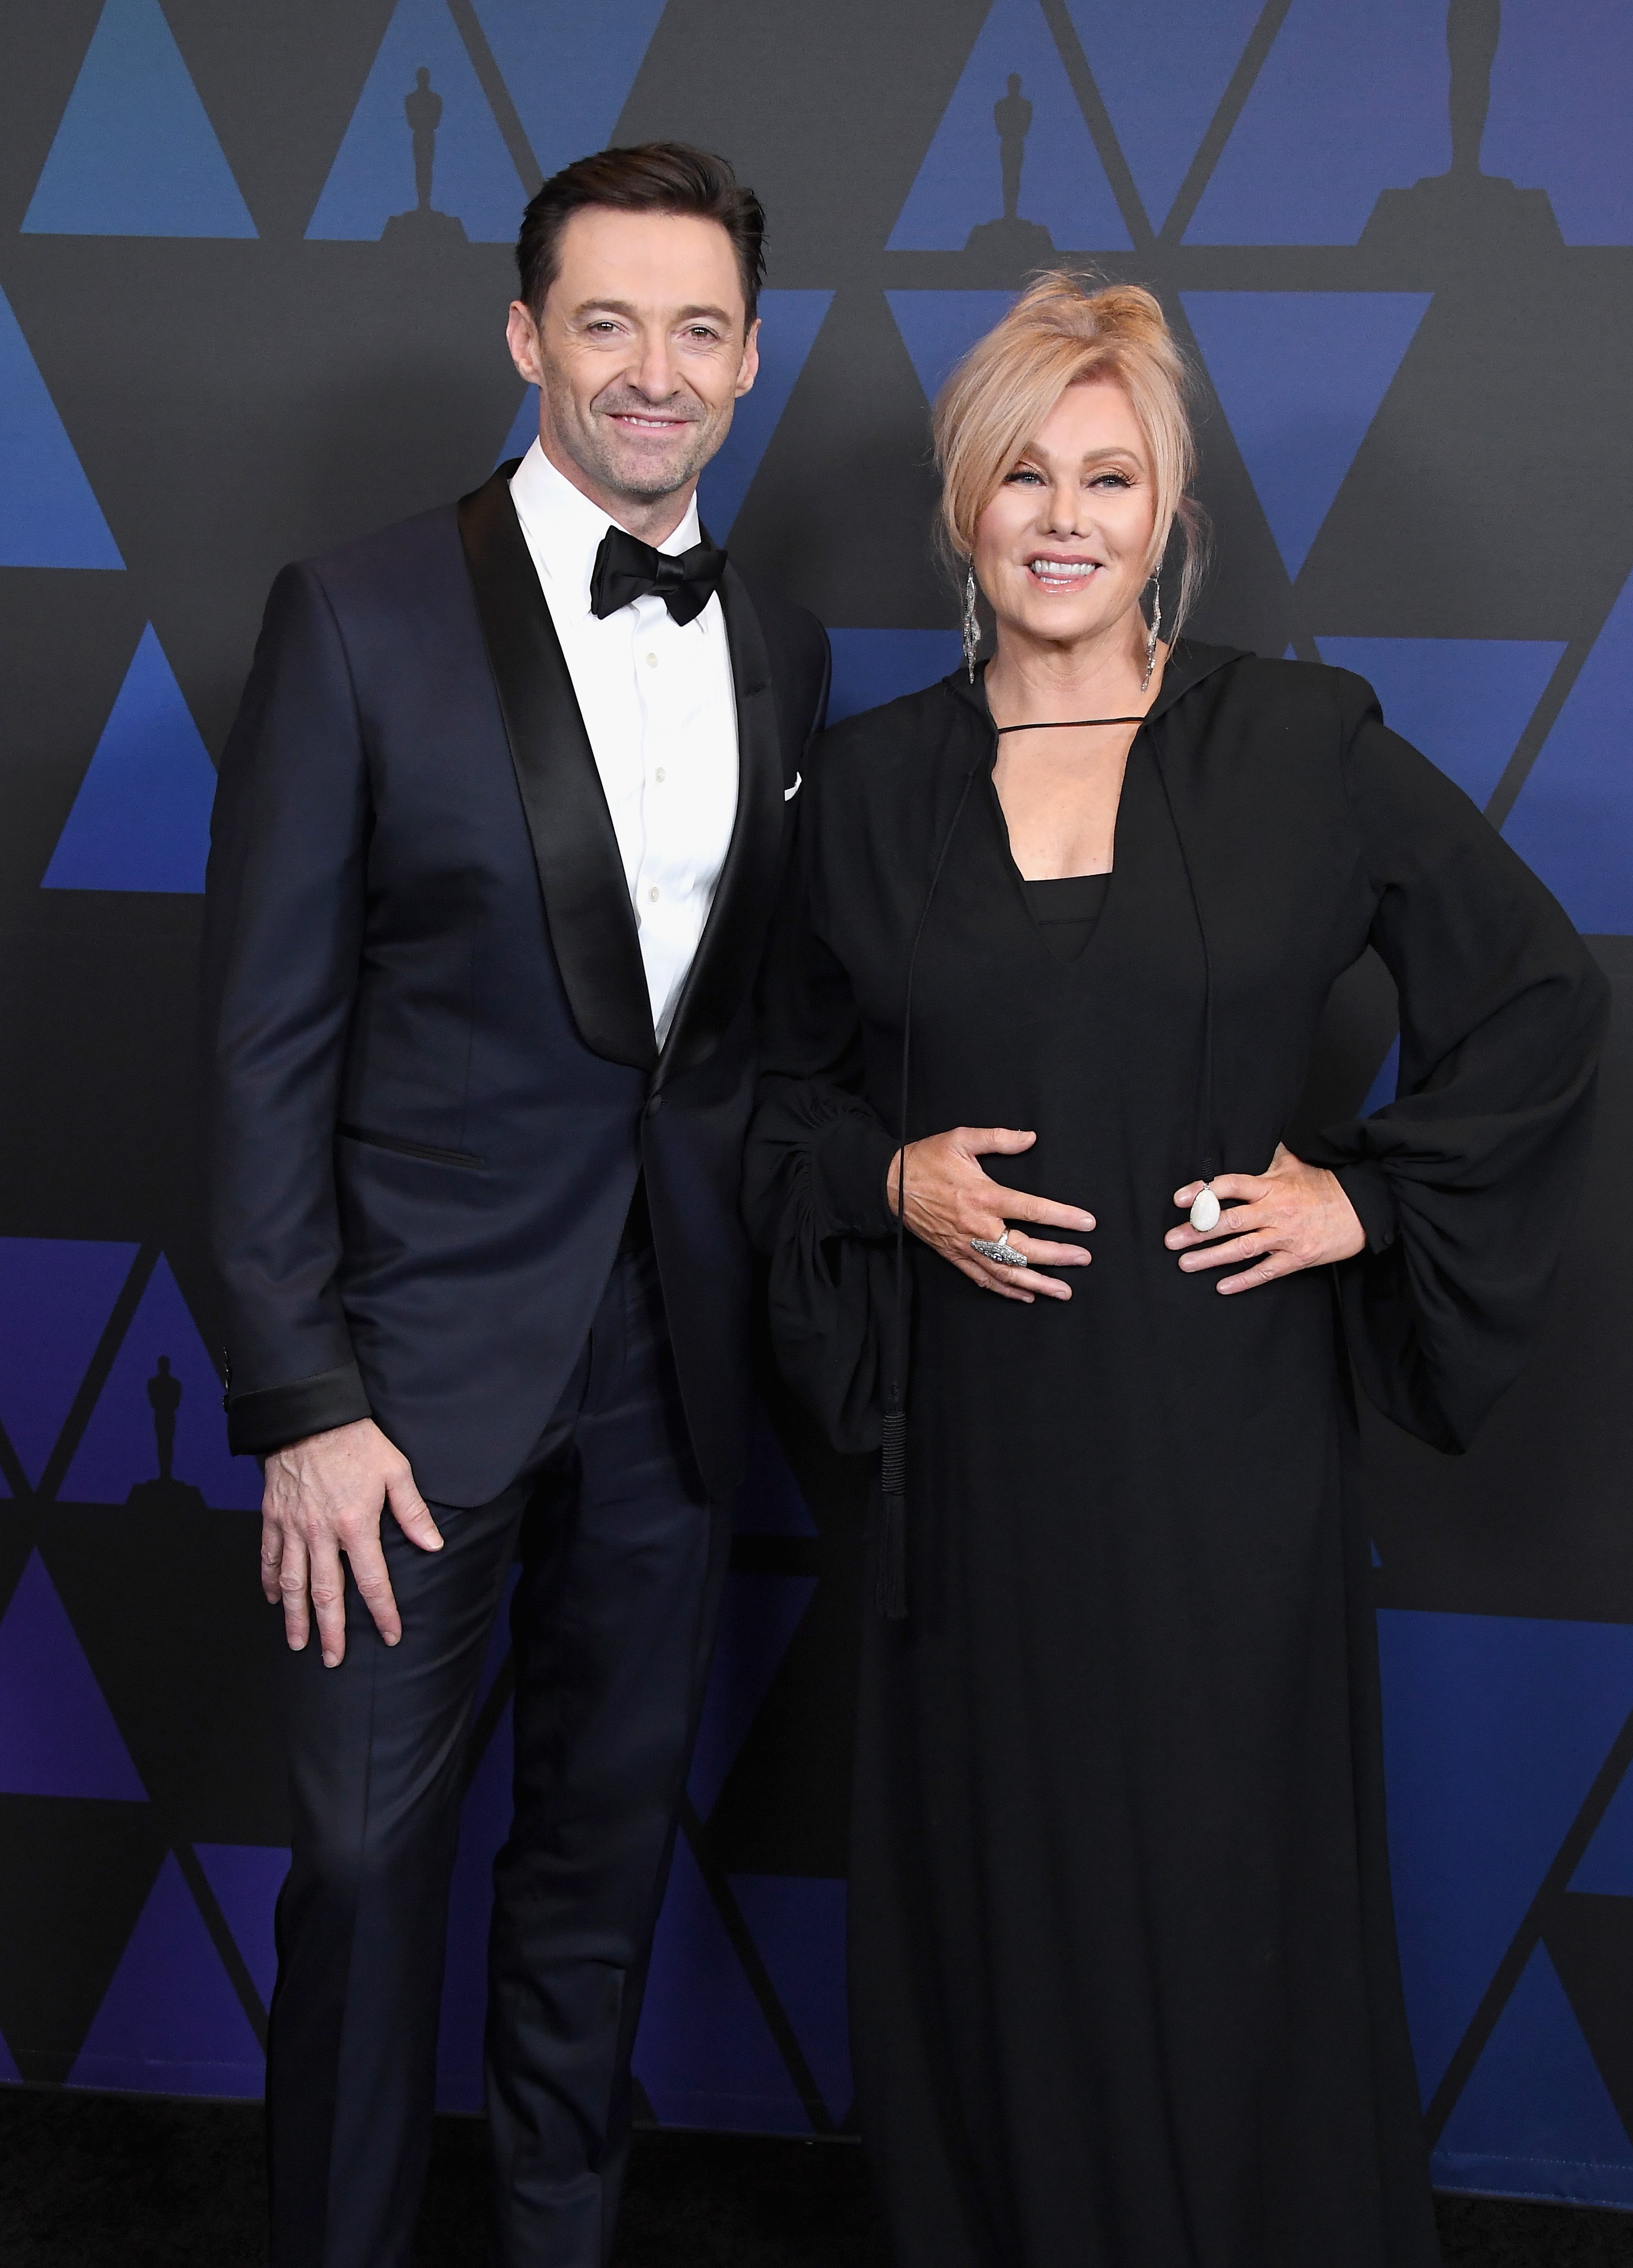 Hugh Jackman and Deborra-Lee Furness at Hollywood & Highland Center on November 18, 2018 in Hollywood, California | Source: Getty Images